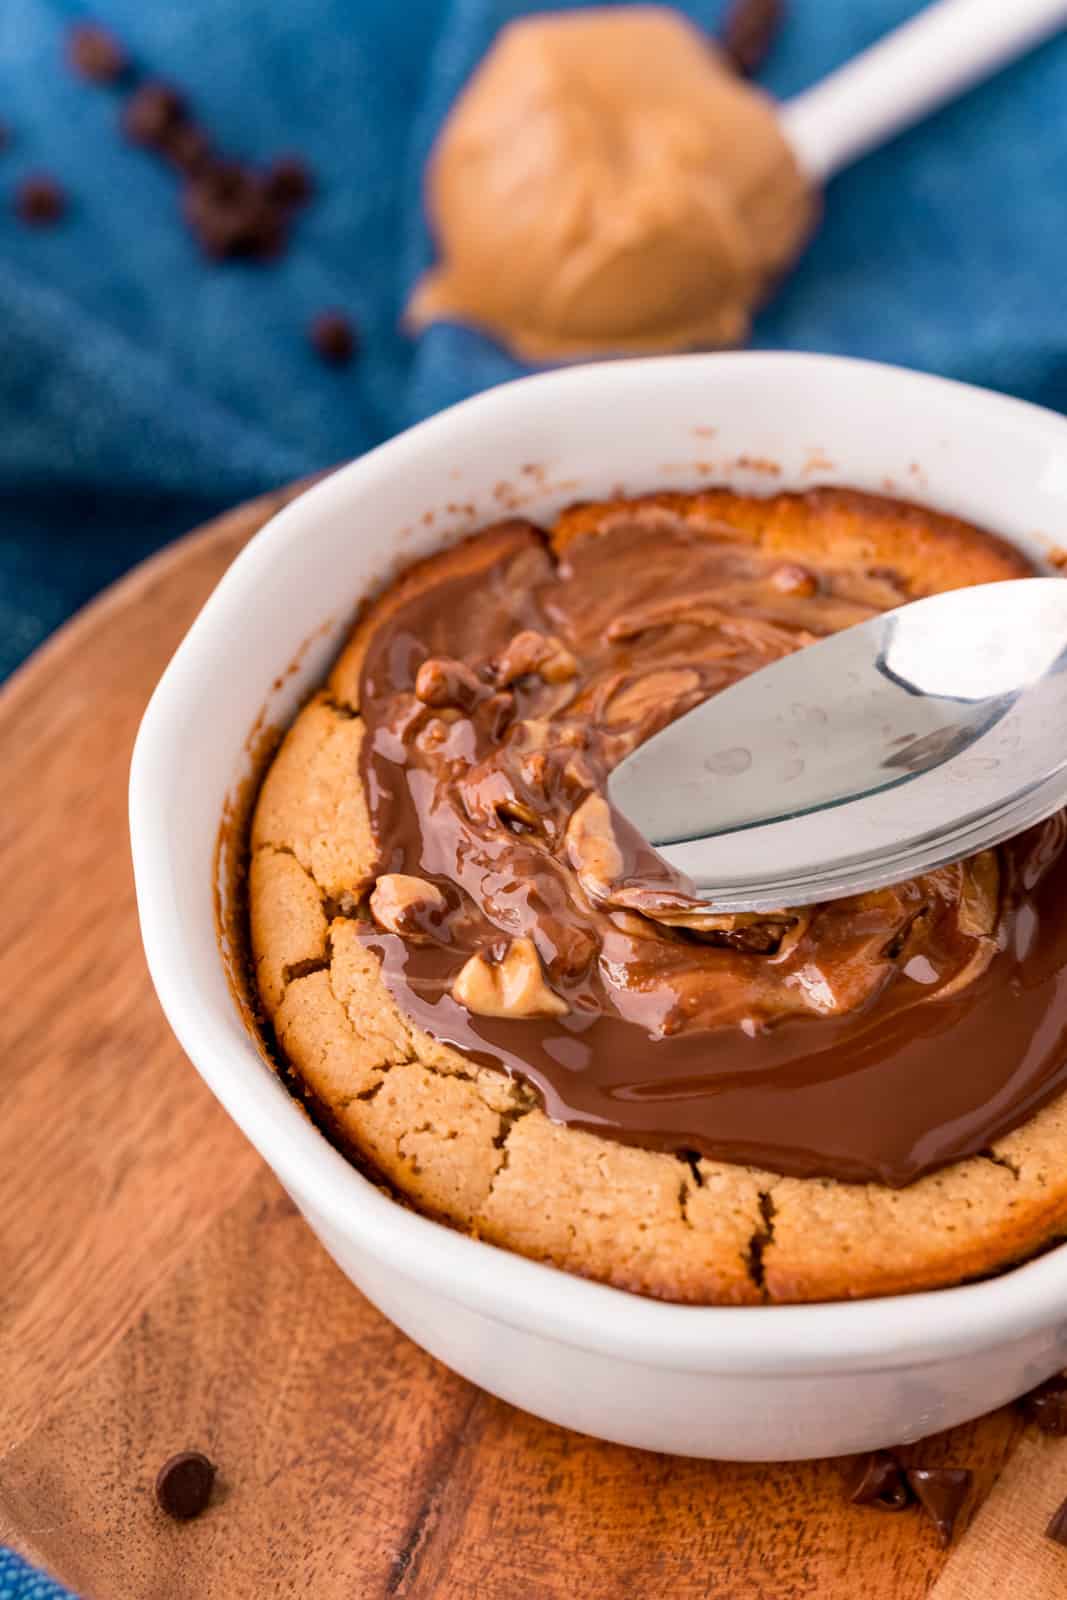 Spoon spreading out melted peanut butter and chocolate over Baked Oats